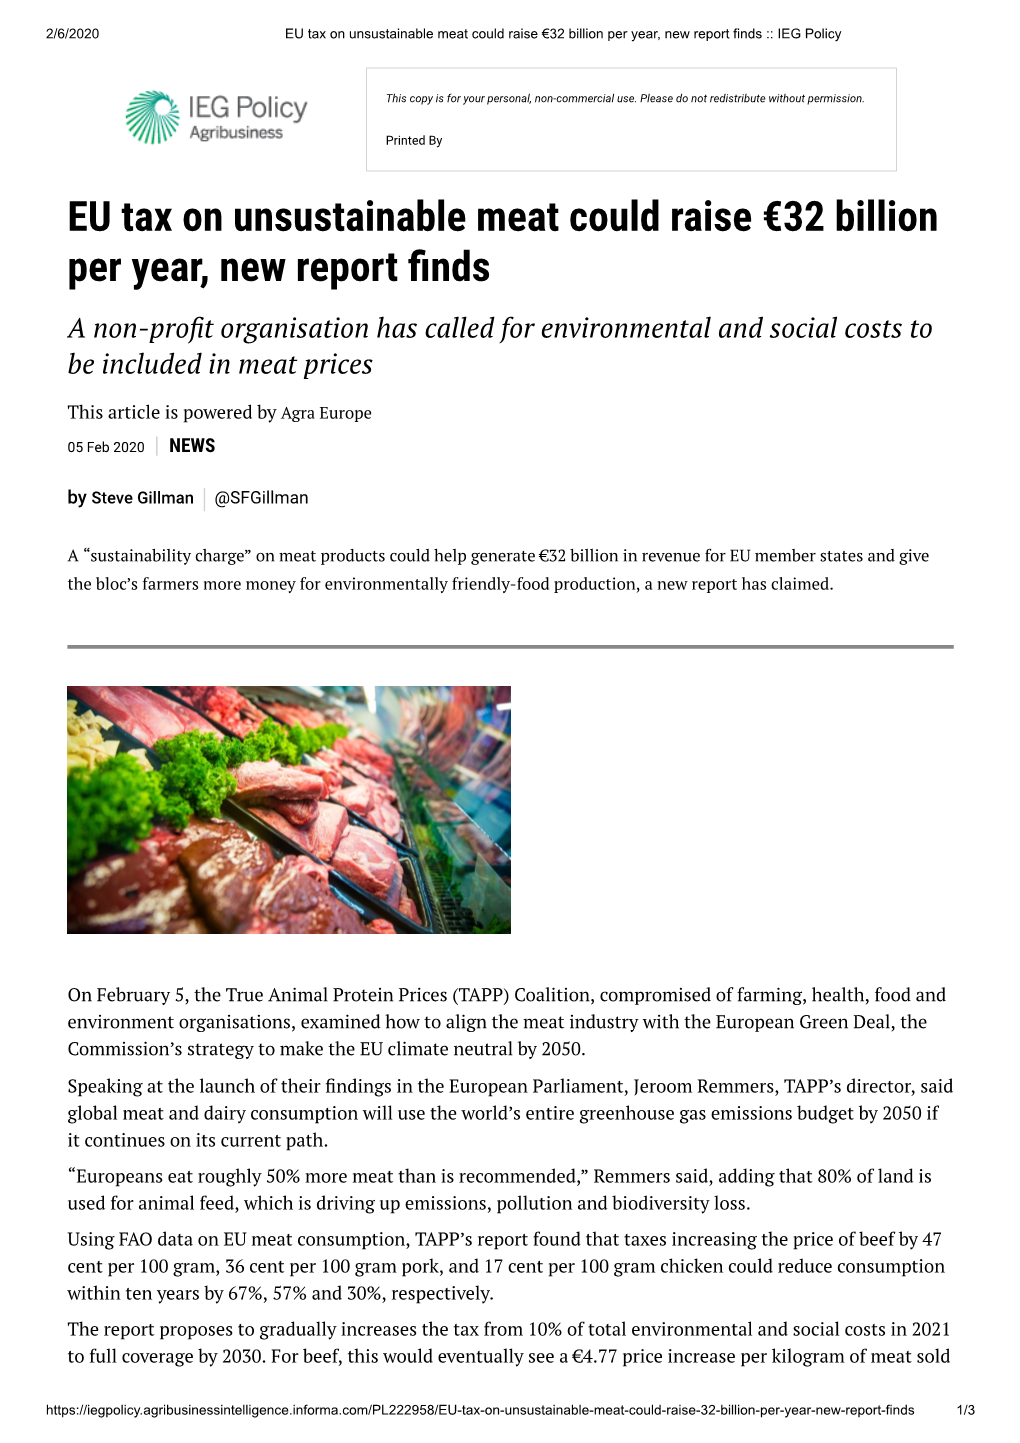 EU Tax on Unsustainable Meat Could Raise €32 Billion Per Year, New Report Finds :: IEG Policy